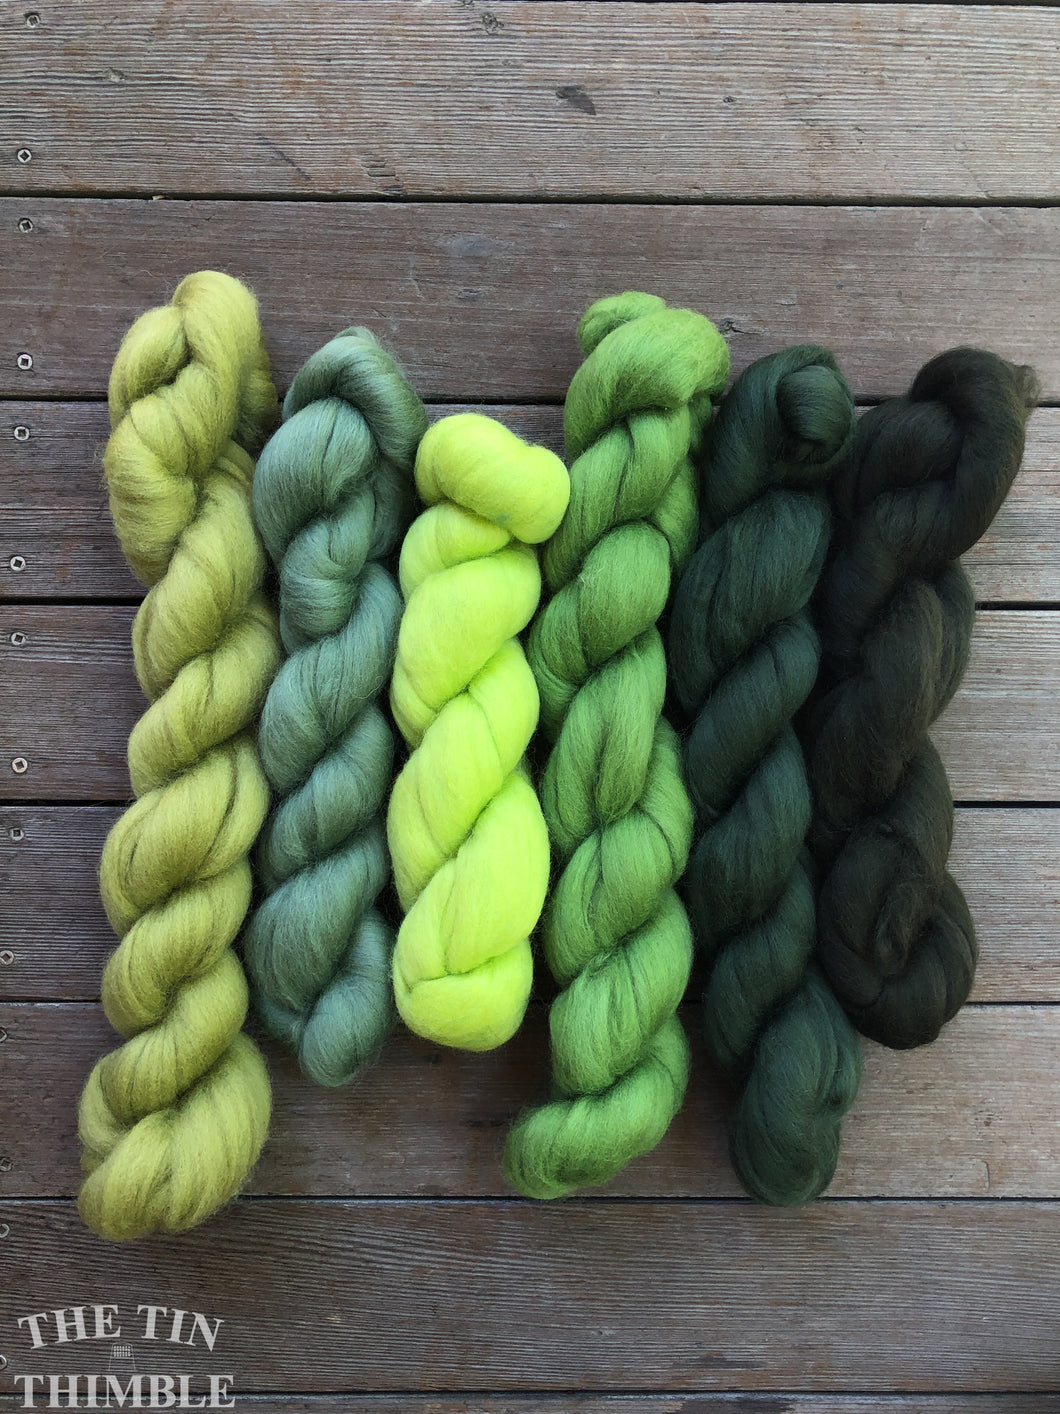 Merino Wool Roving Pack - Greens - Six Colors, 1 Ounce Each - High Quality Merino Wool for Felting, Weaving and Spinning